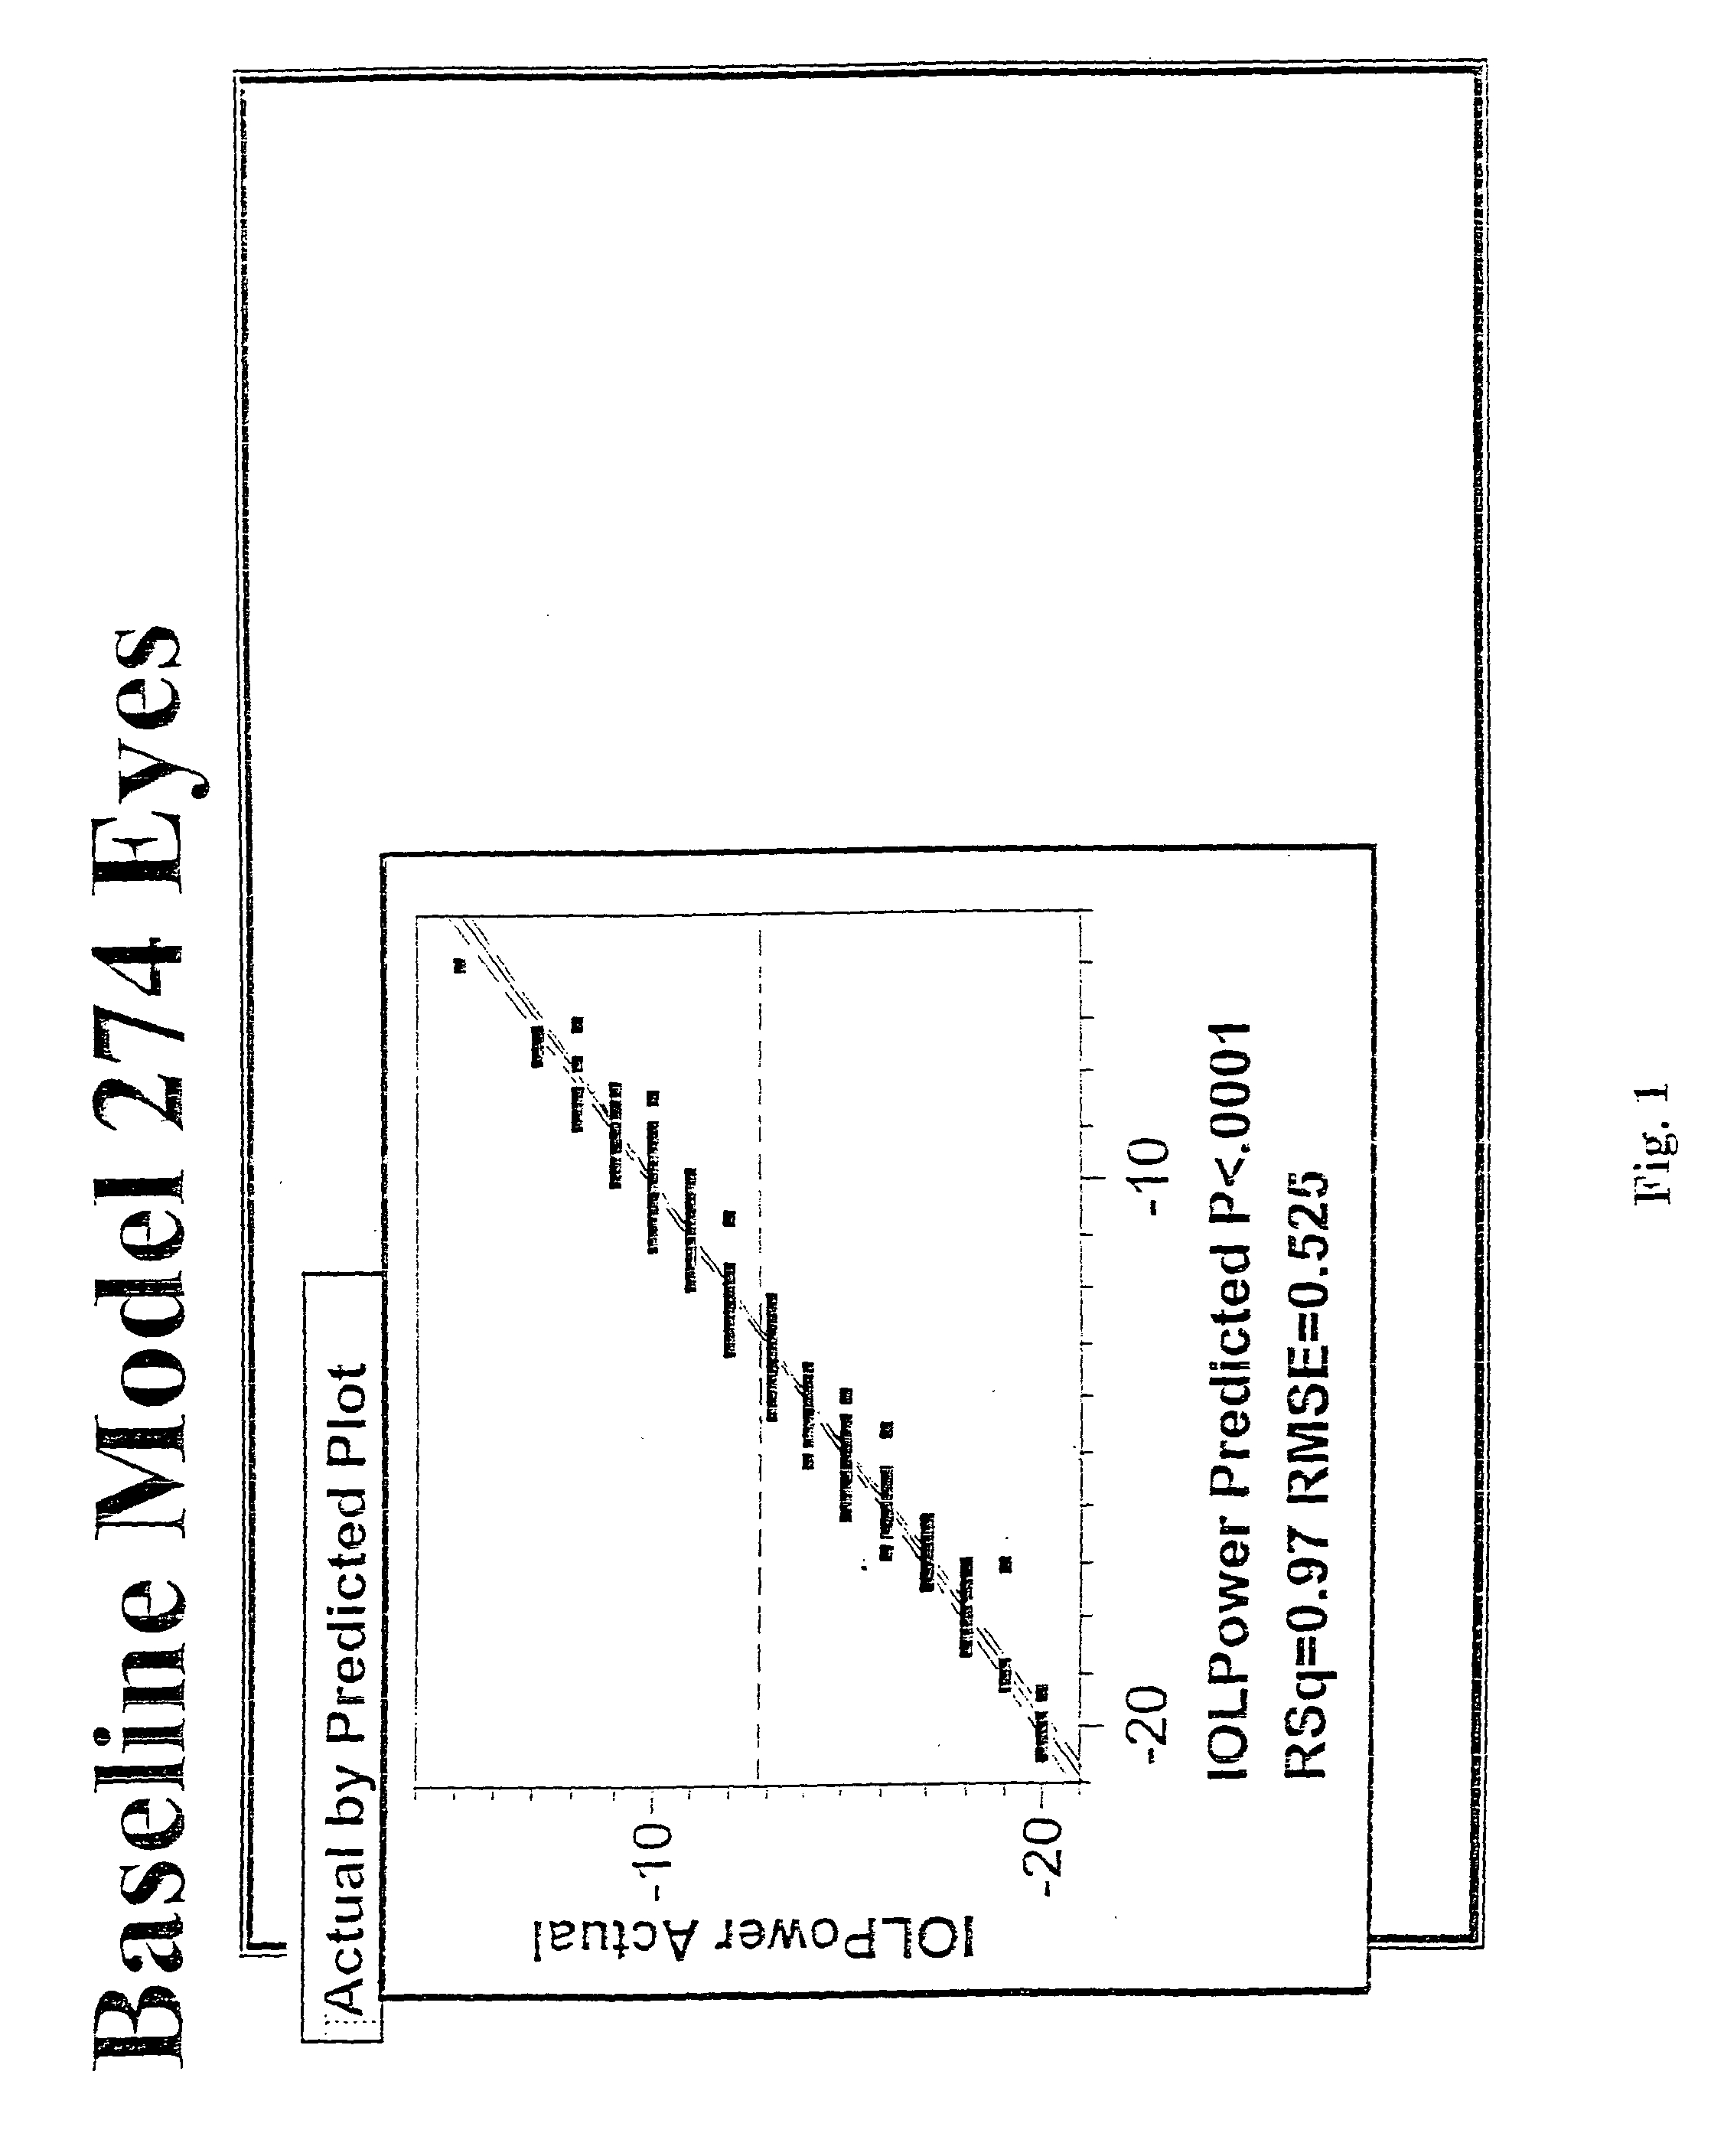 Method for determining the power of an intraocular lens used for the treatment of myopia